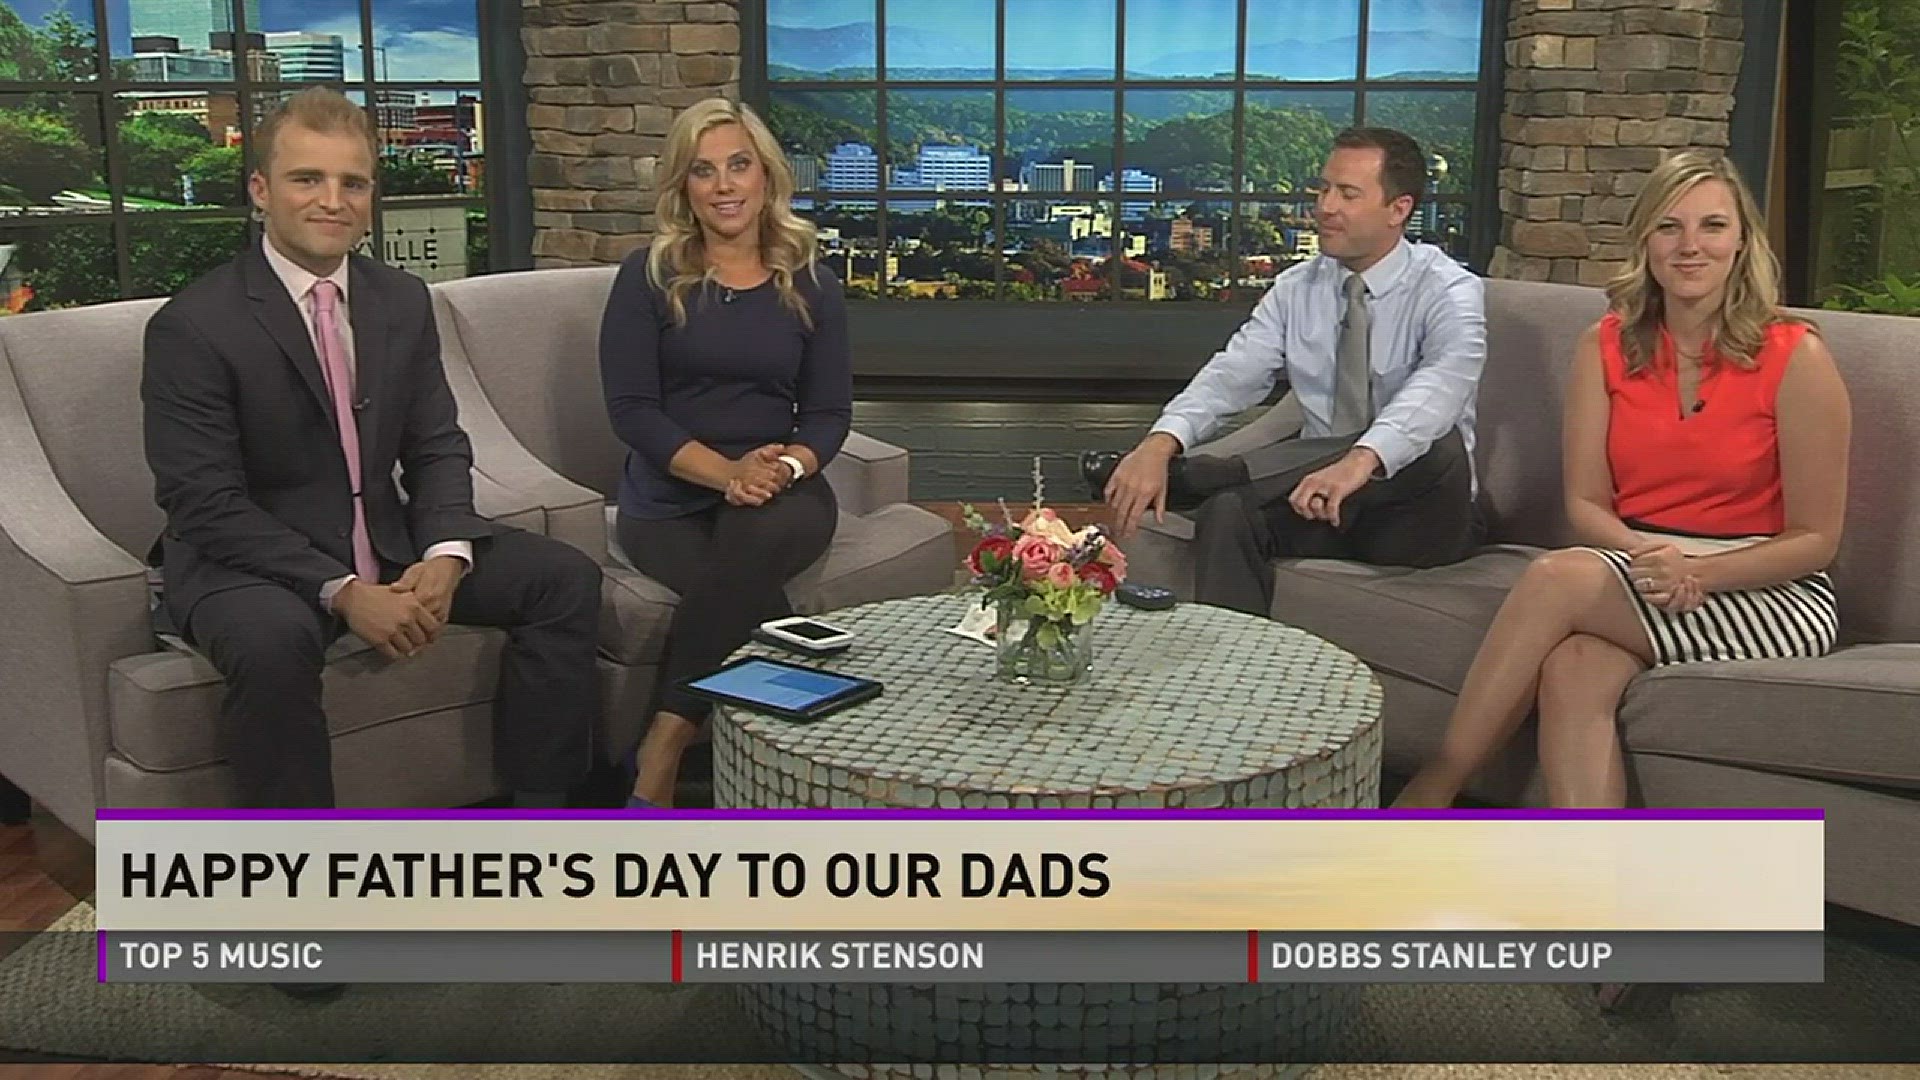 Abby, Brandon, Katie and Mike wish their dads a Happy Father's Day